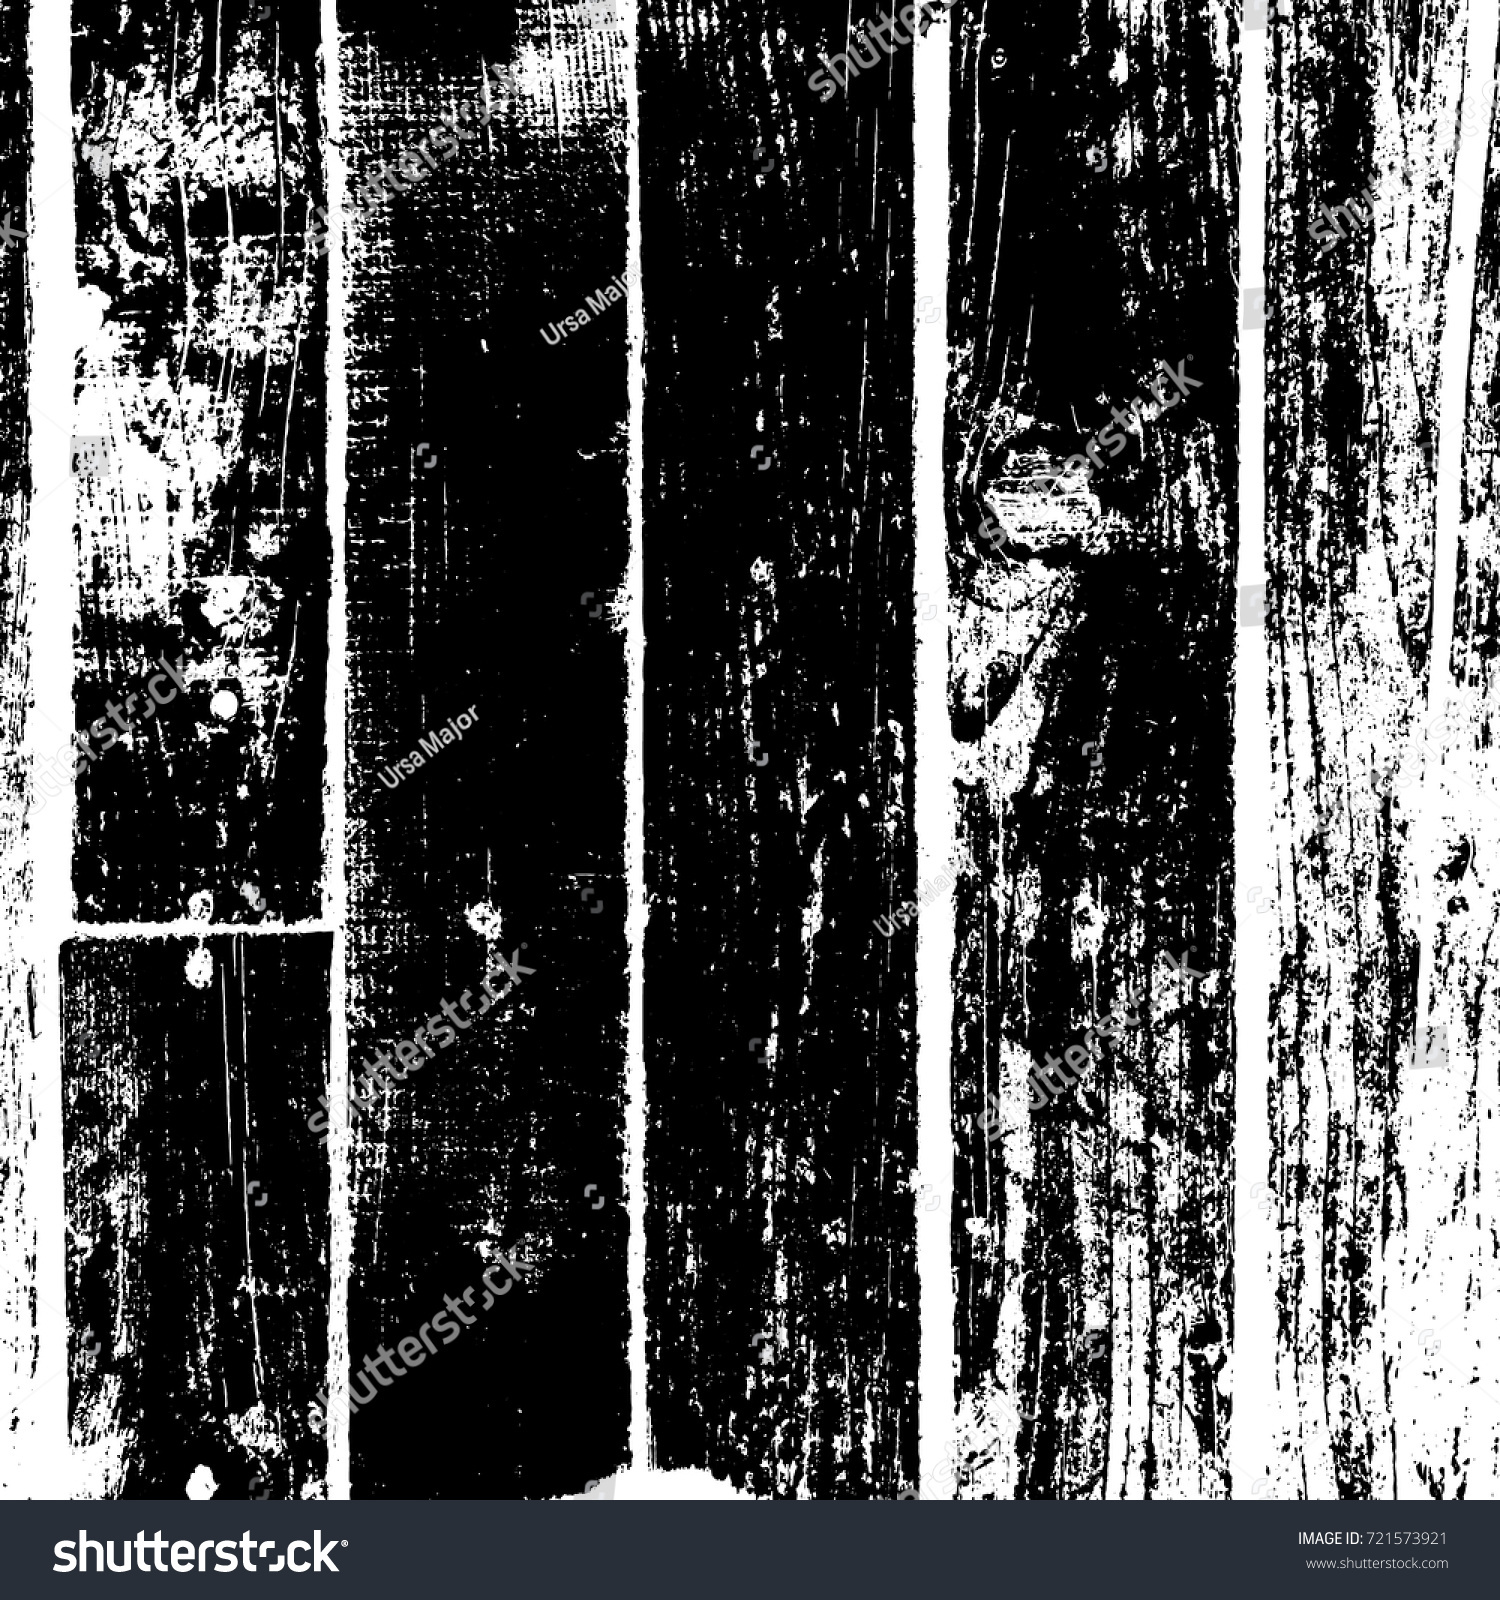 Distressed Grainy Wood Overlay Texture Grunge Stock Vector 721573921 ...